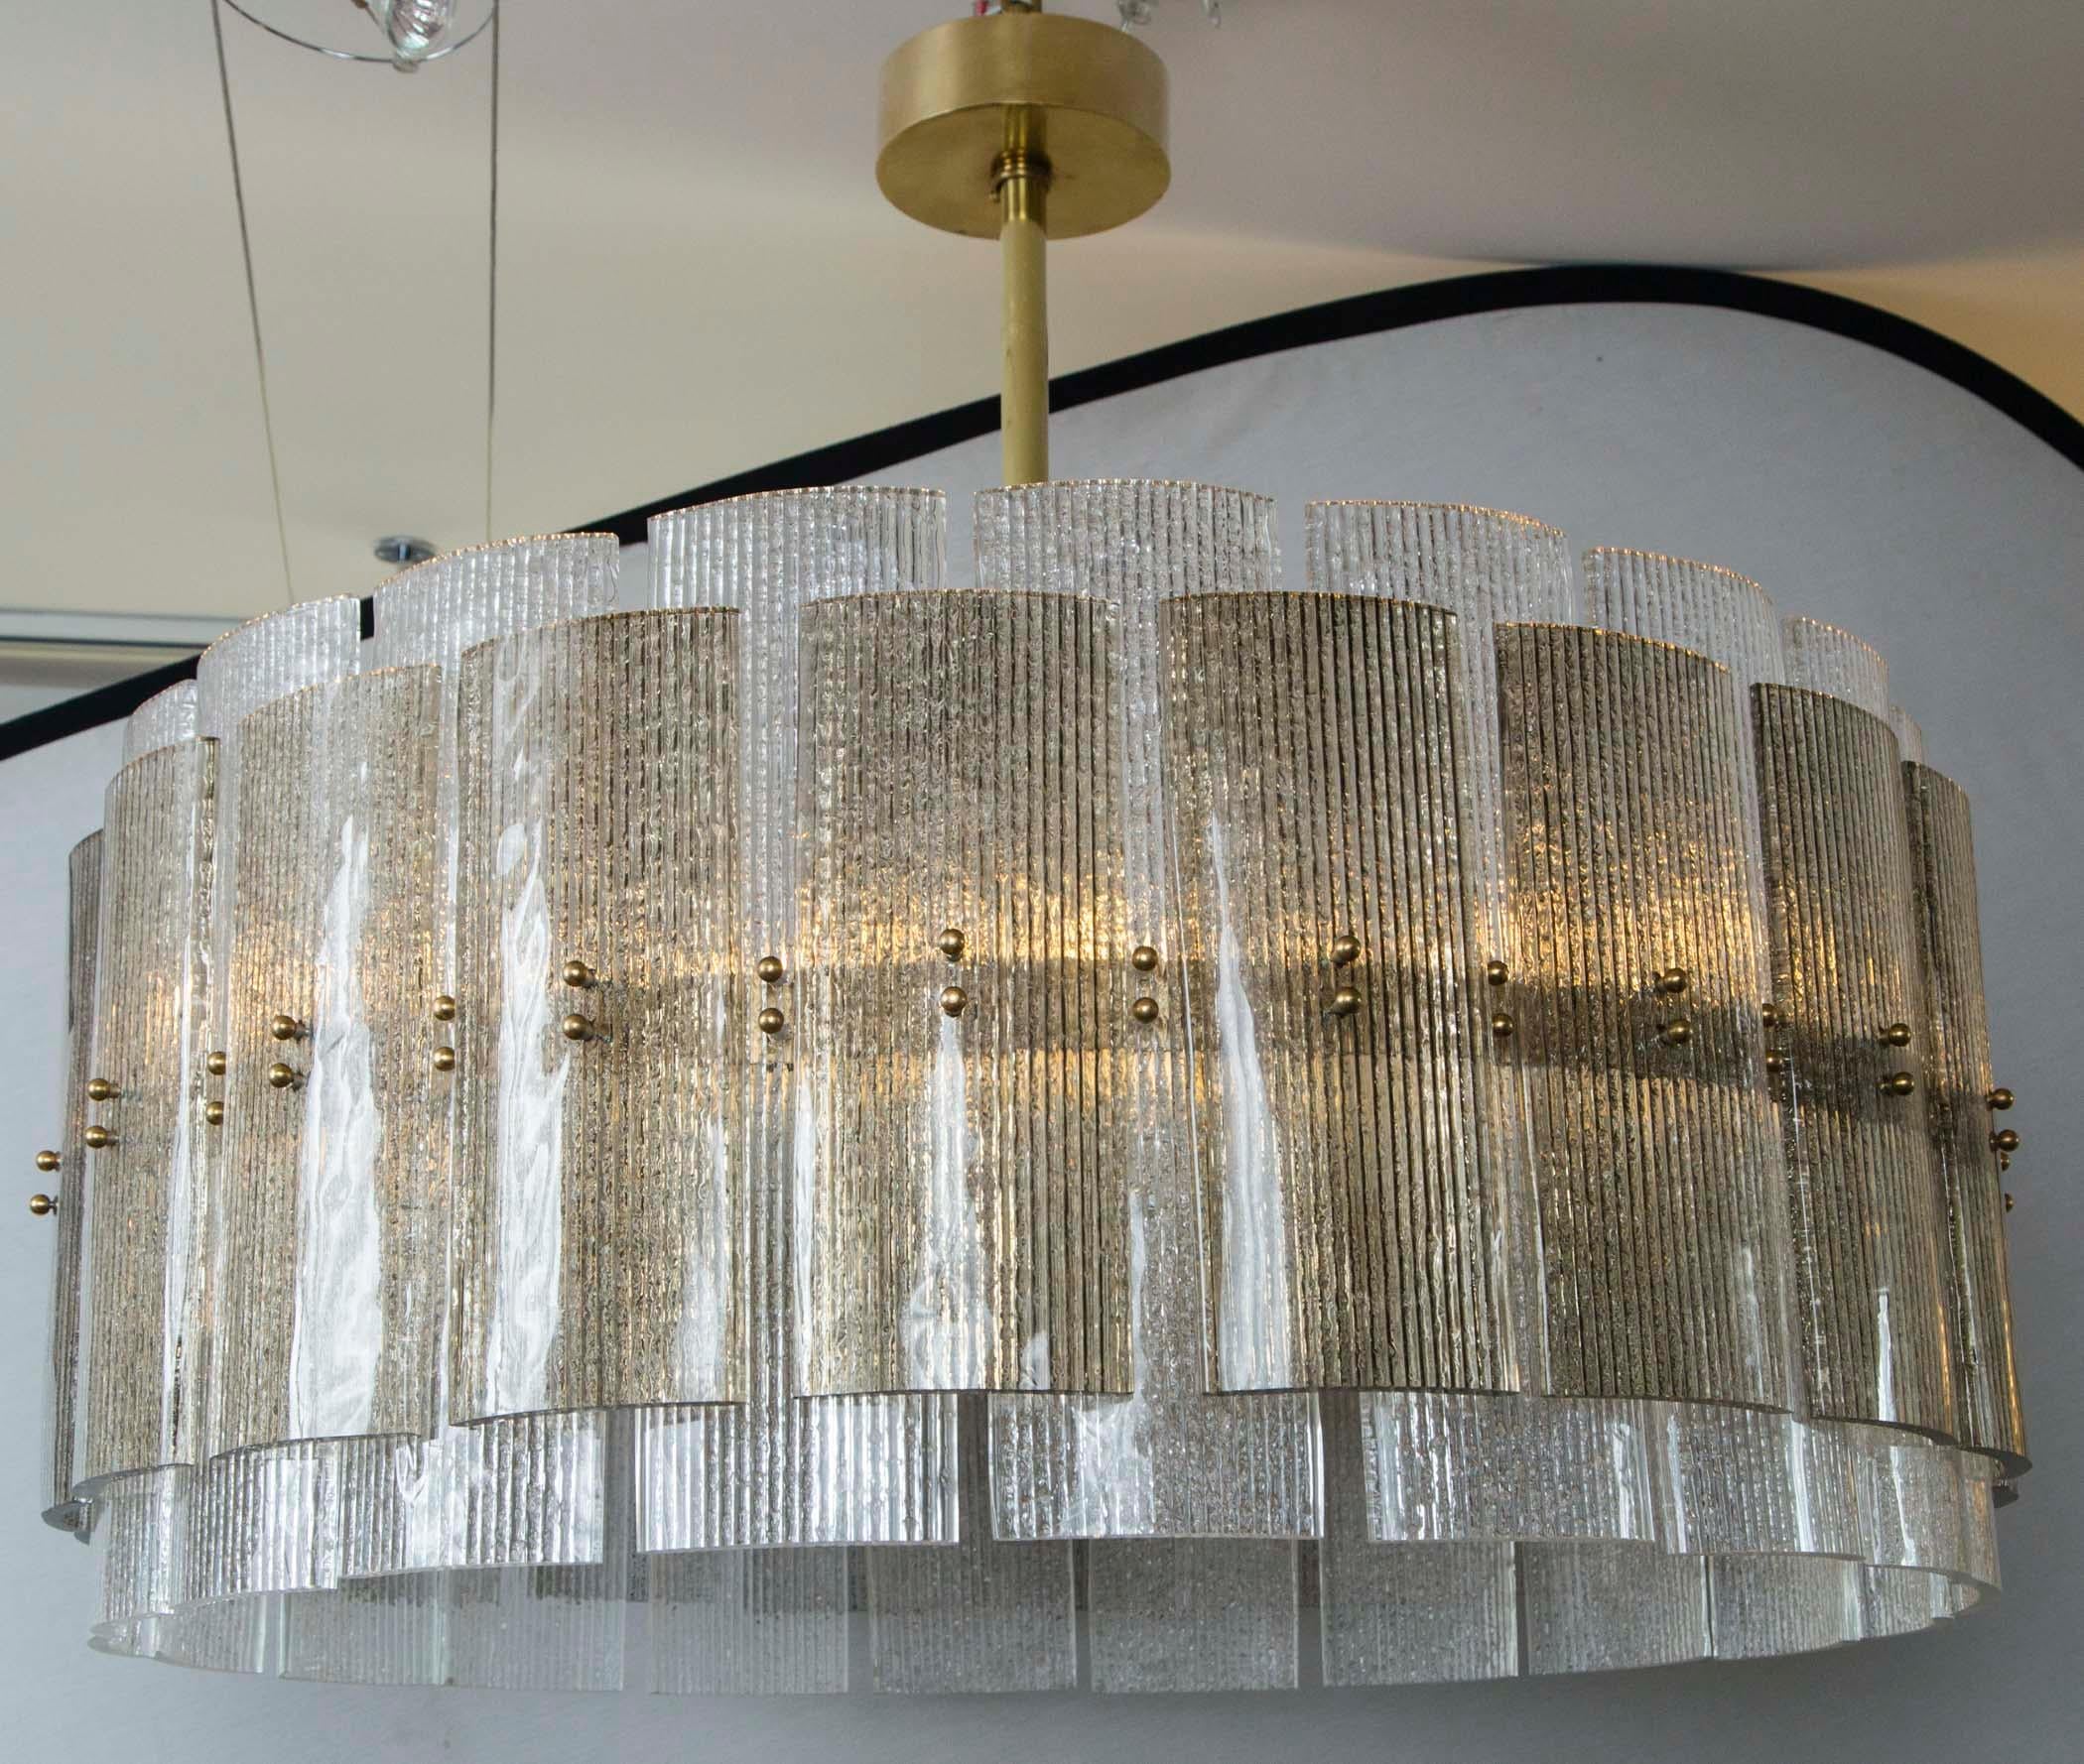 Very chic layered Murano glass drum chandelier with icy clear and smokey taupe toned glass.

Also customization available in other sizing, hardware and glass blown colors: clear, smokey taupe and grey 
(larger orders we can customize to any glass